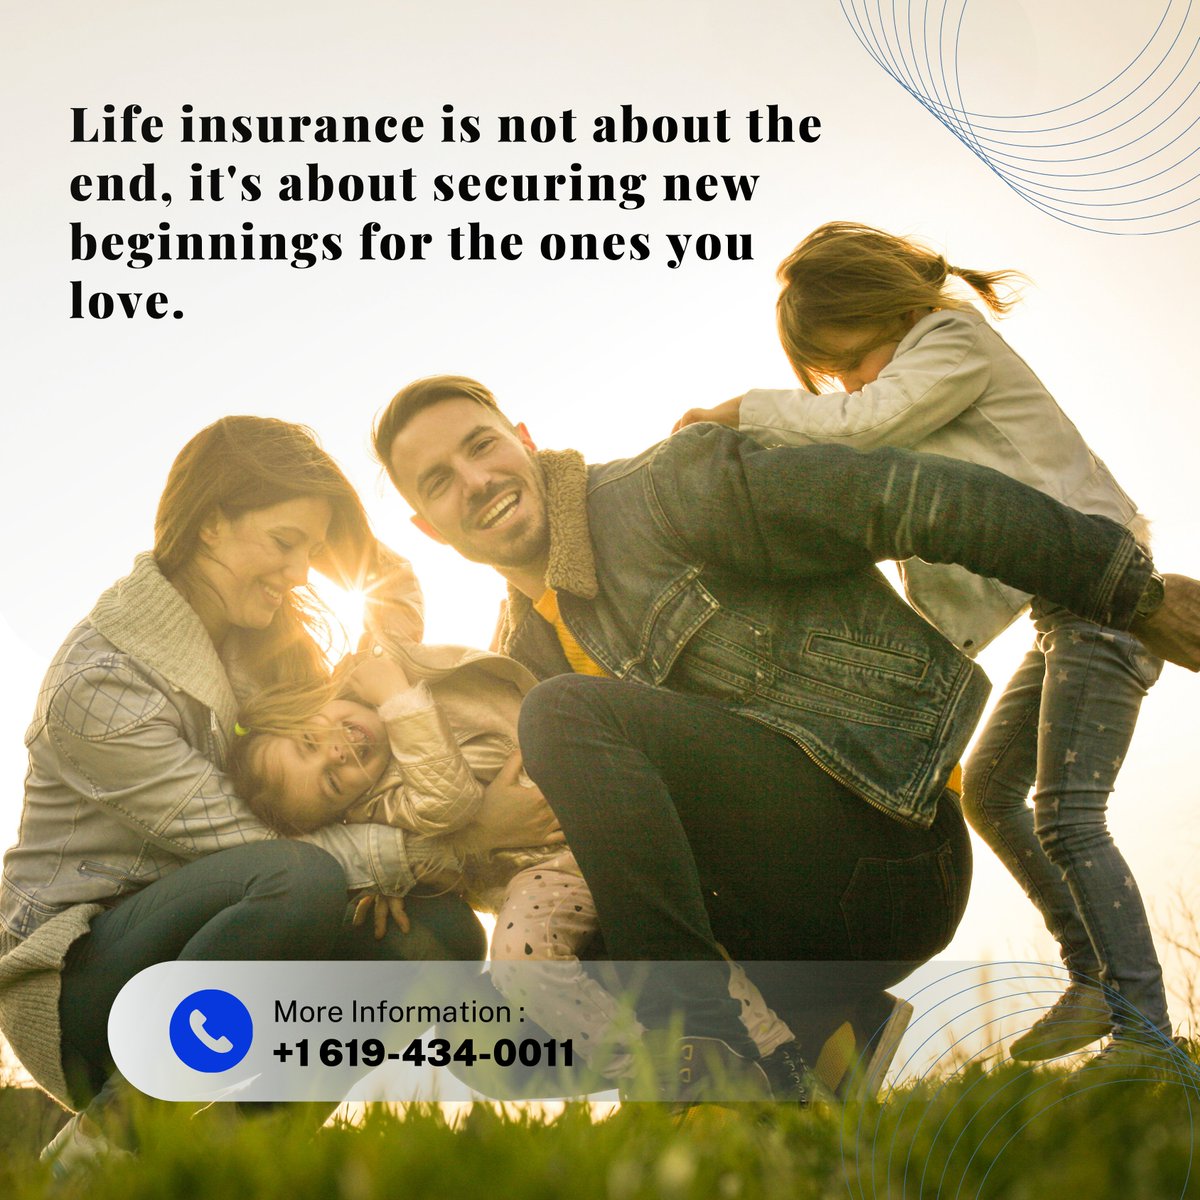 Protecting what matters most, one policy at a time. 💼✨
.
.
#lifeinsurance #insurance #healthinsurance #insuranceagent #financialplanning #homeinsurance #businessinsurance #financialfreedom #autoinsurance #family